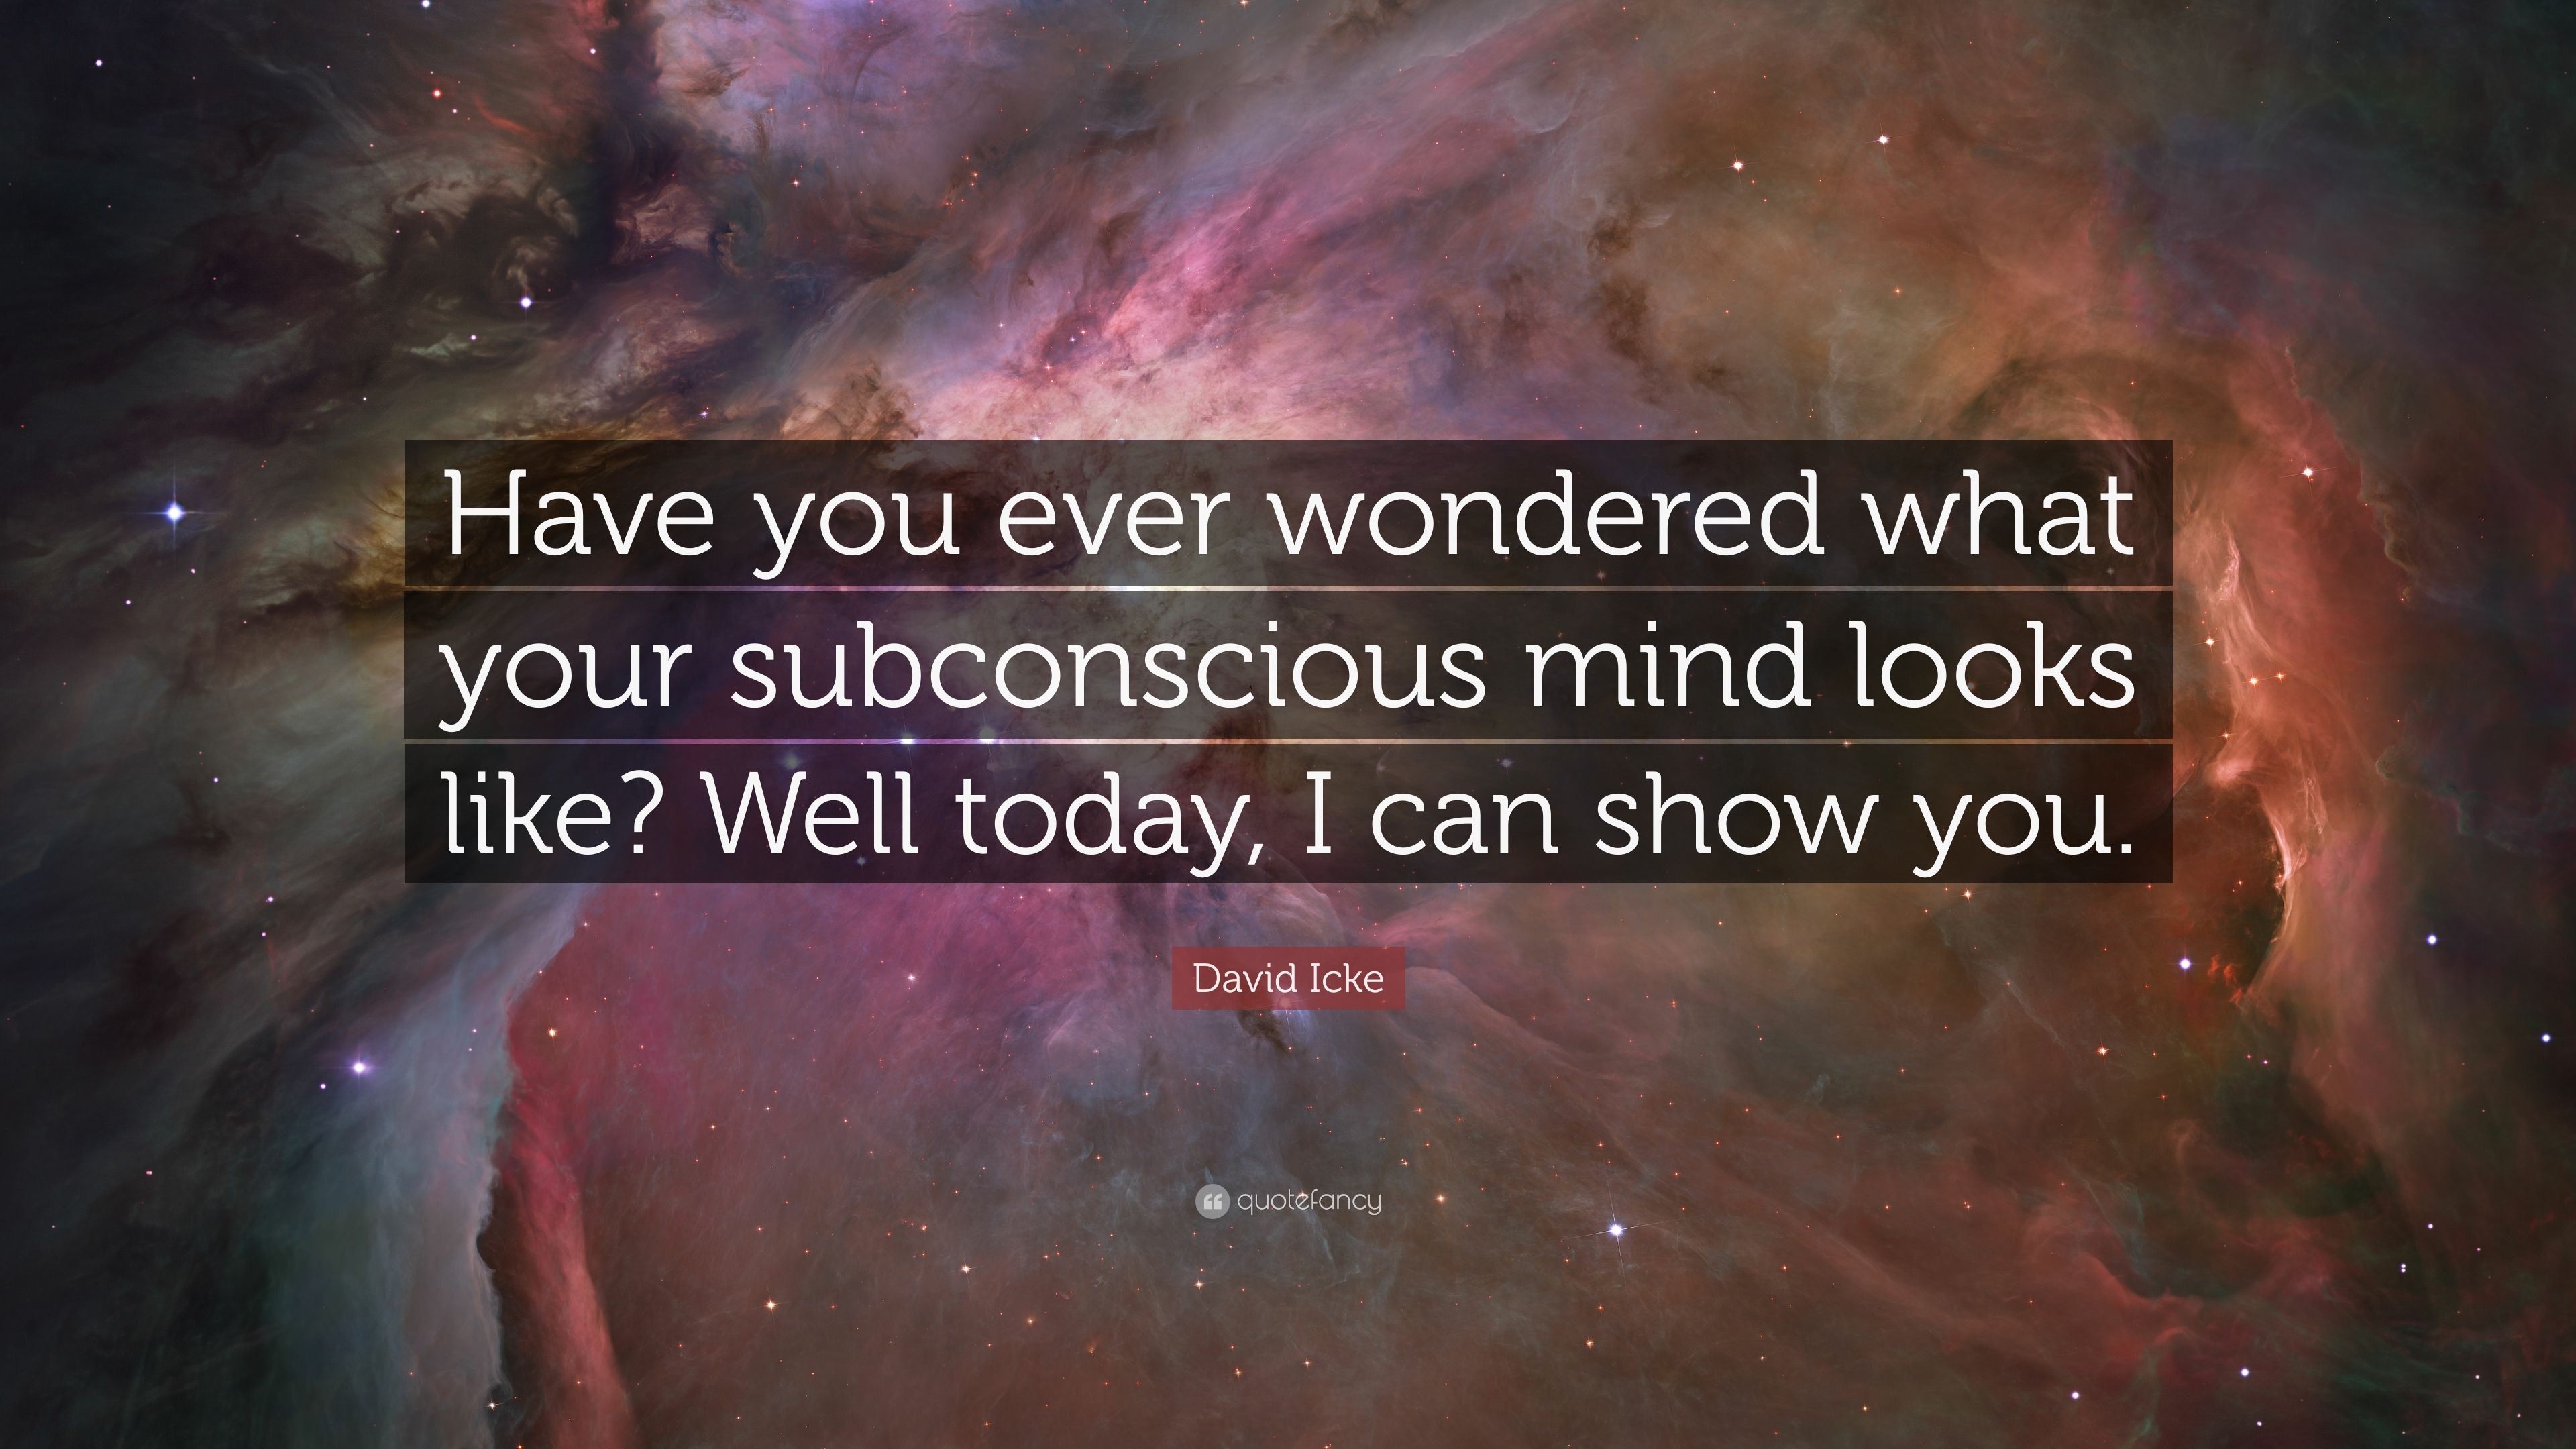 David Icke Quote “have You Ever Wondered What Your Subconscious Mind Looks Like Well Today I